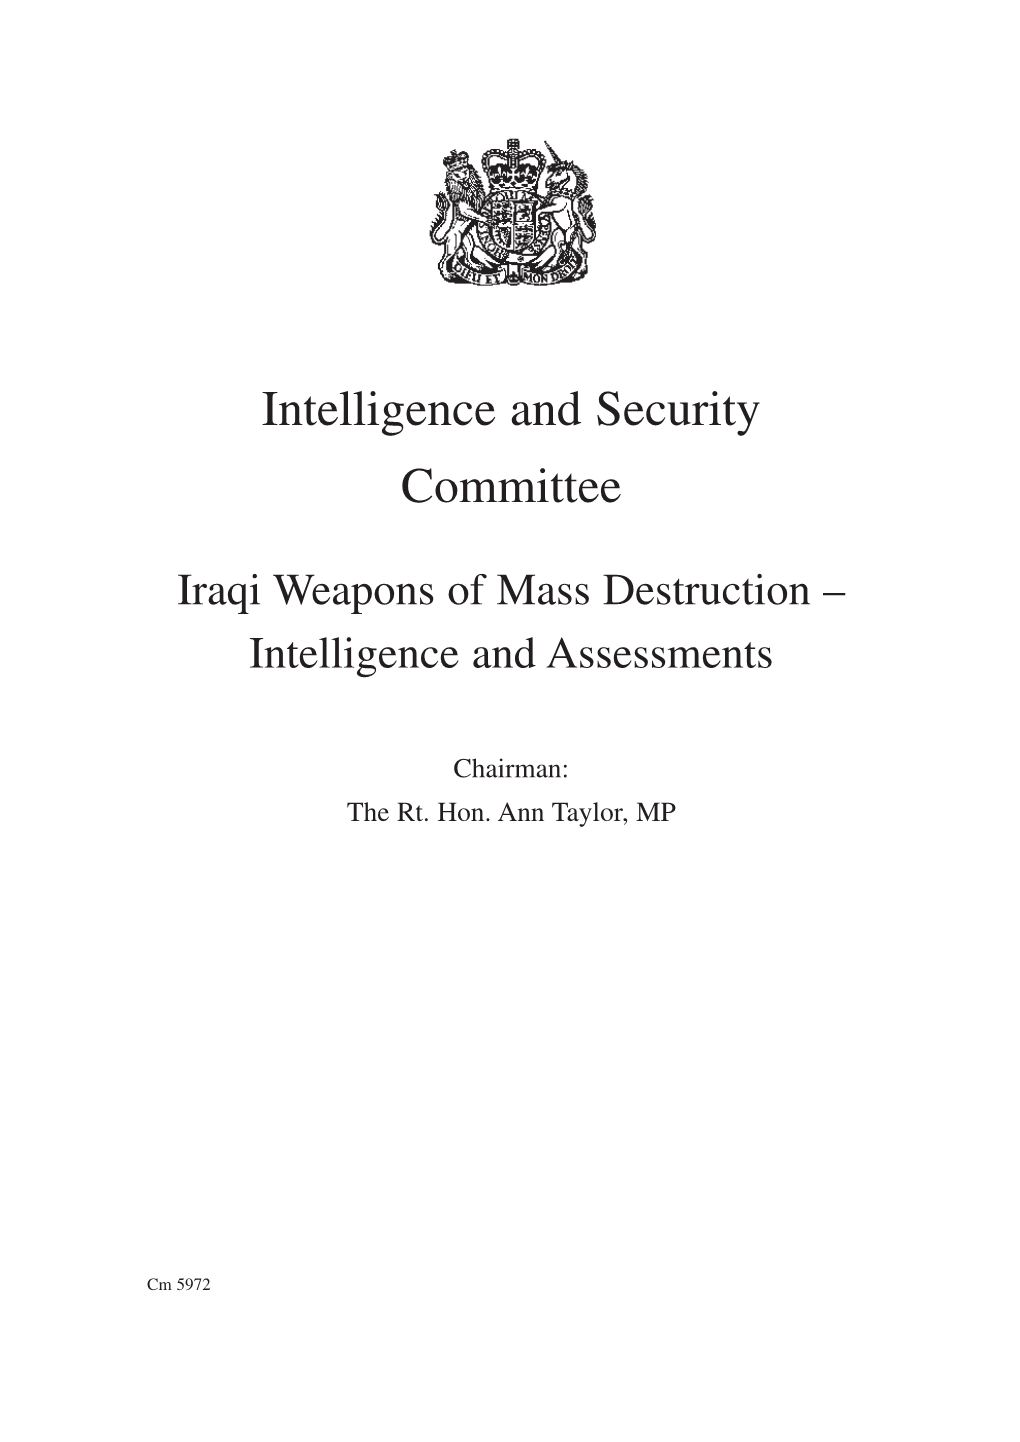 Iraqi Weapons of Mass Destruction – Intelligence and Assessments